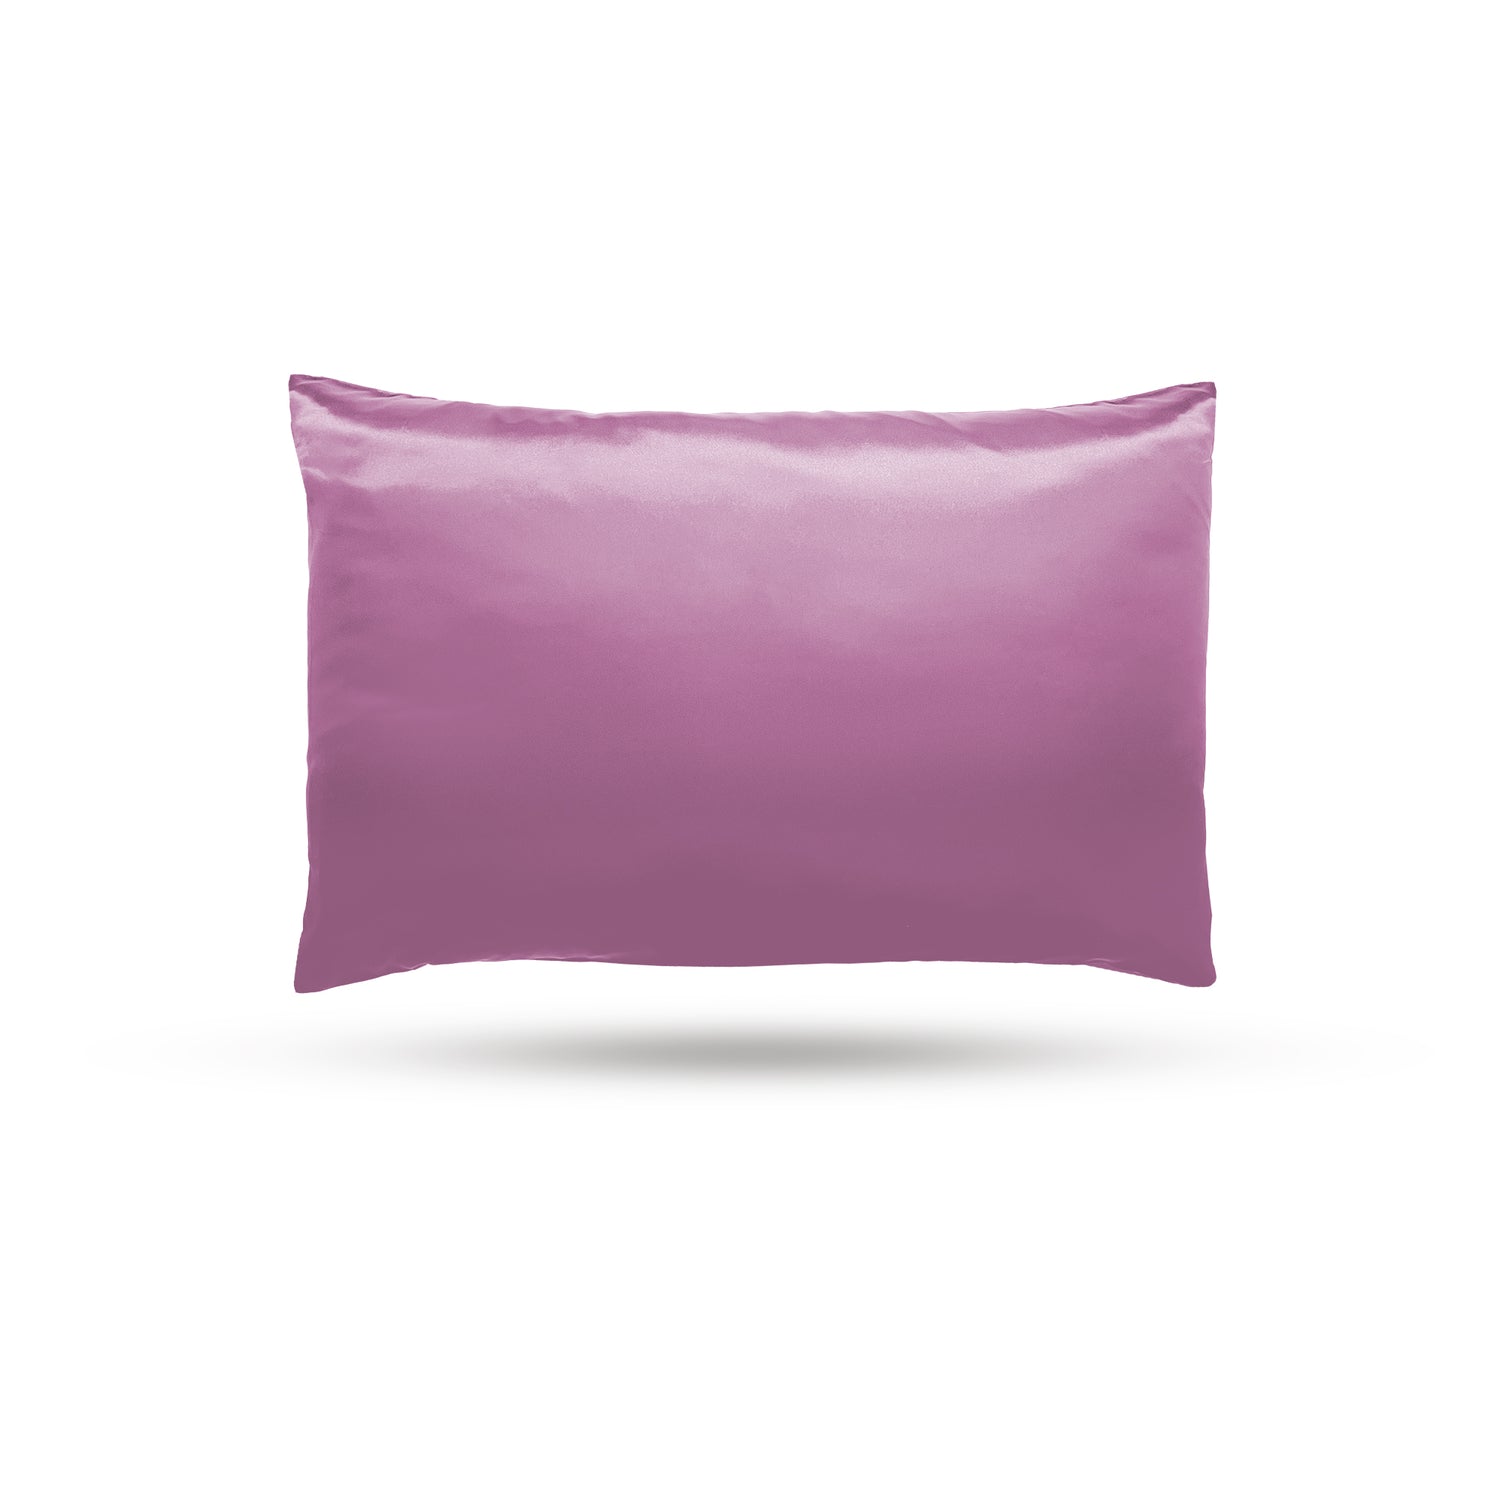 Rose satin pillowcase for healthy curls 